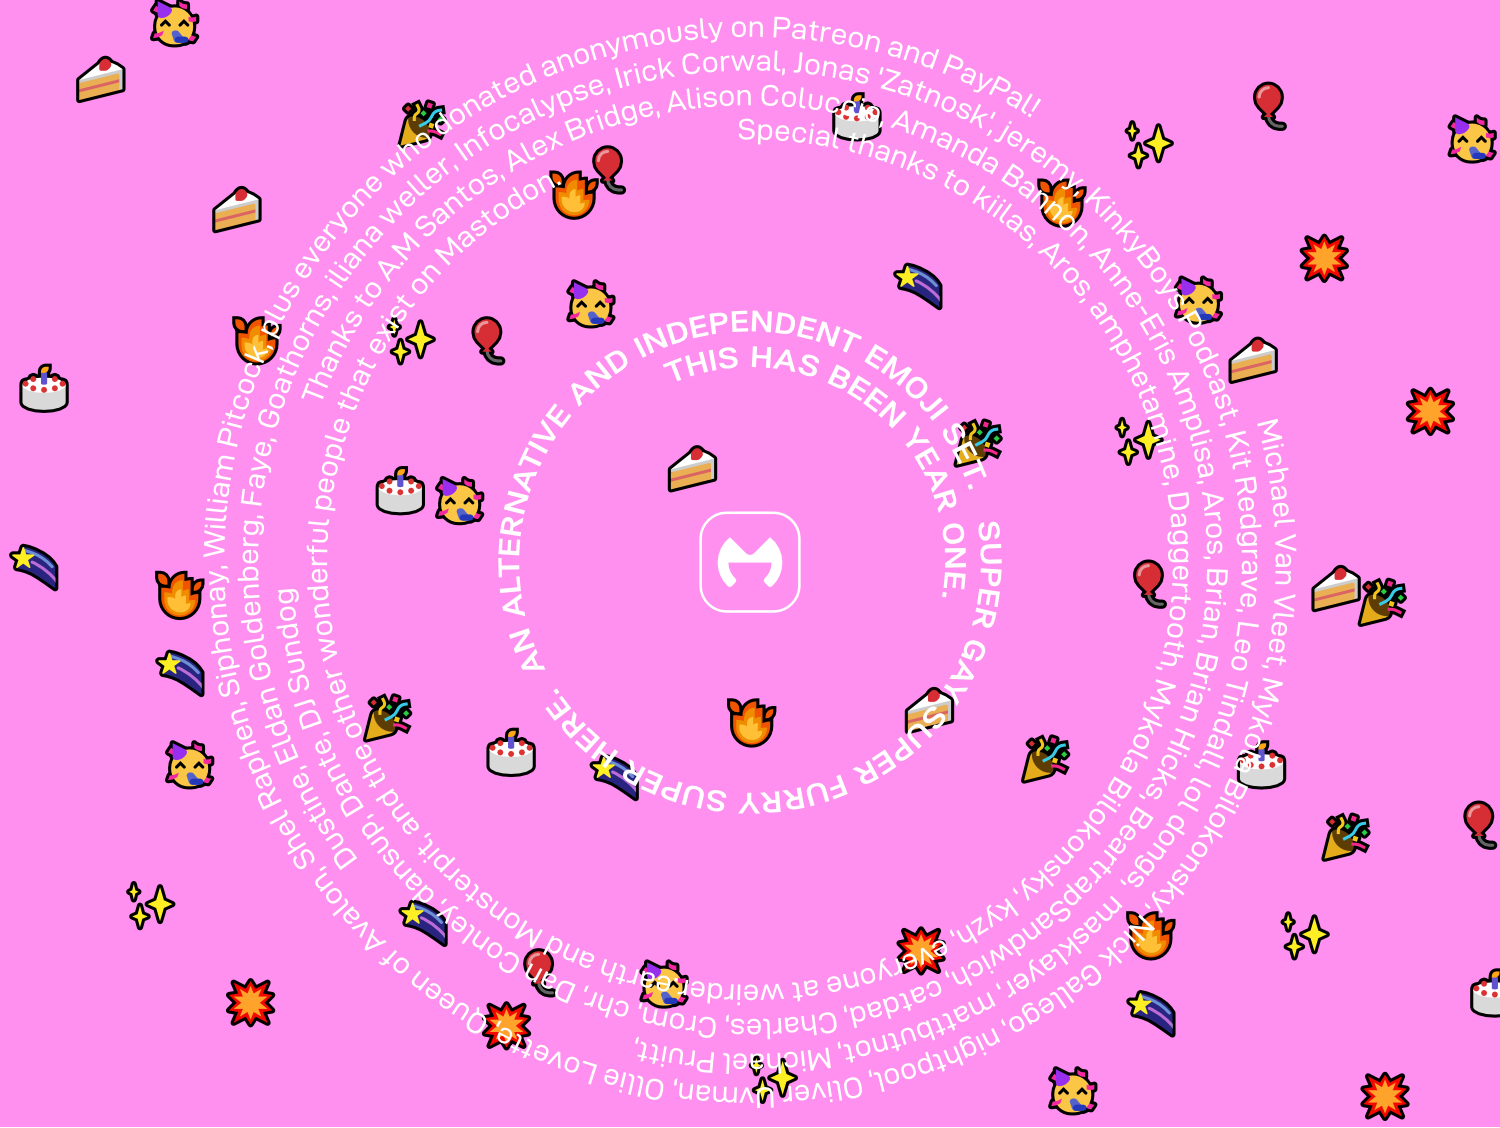 Pink background with scattered party-related emoji. There's a white Mutant Standard logo in the middle with various lines of text arranged in circles surrounding the logo - 'THIS HAS BEEN YEAR ONE' 'AN ALTERNATIVE AND INDEPENDENT EMOJI SET. SUPER GAY SUPER FURRY SUPER HERE.' More outer circles give special thanks to various people and thank all of the non-anonymous donors by name and anonymous donors also.